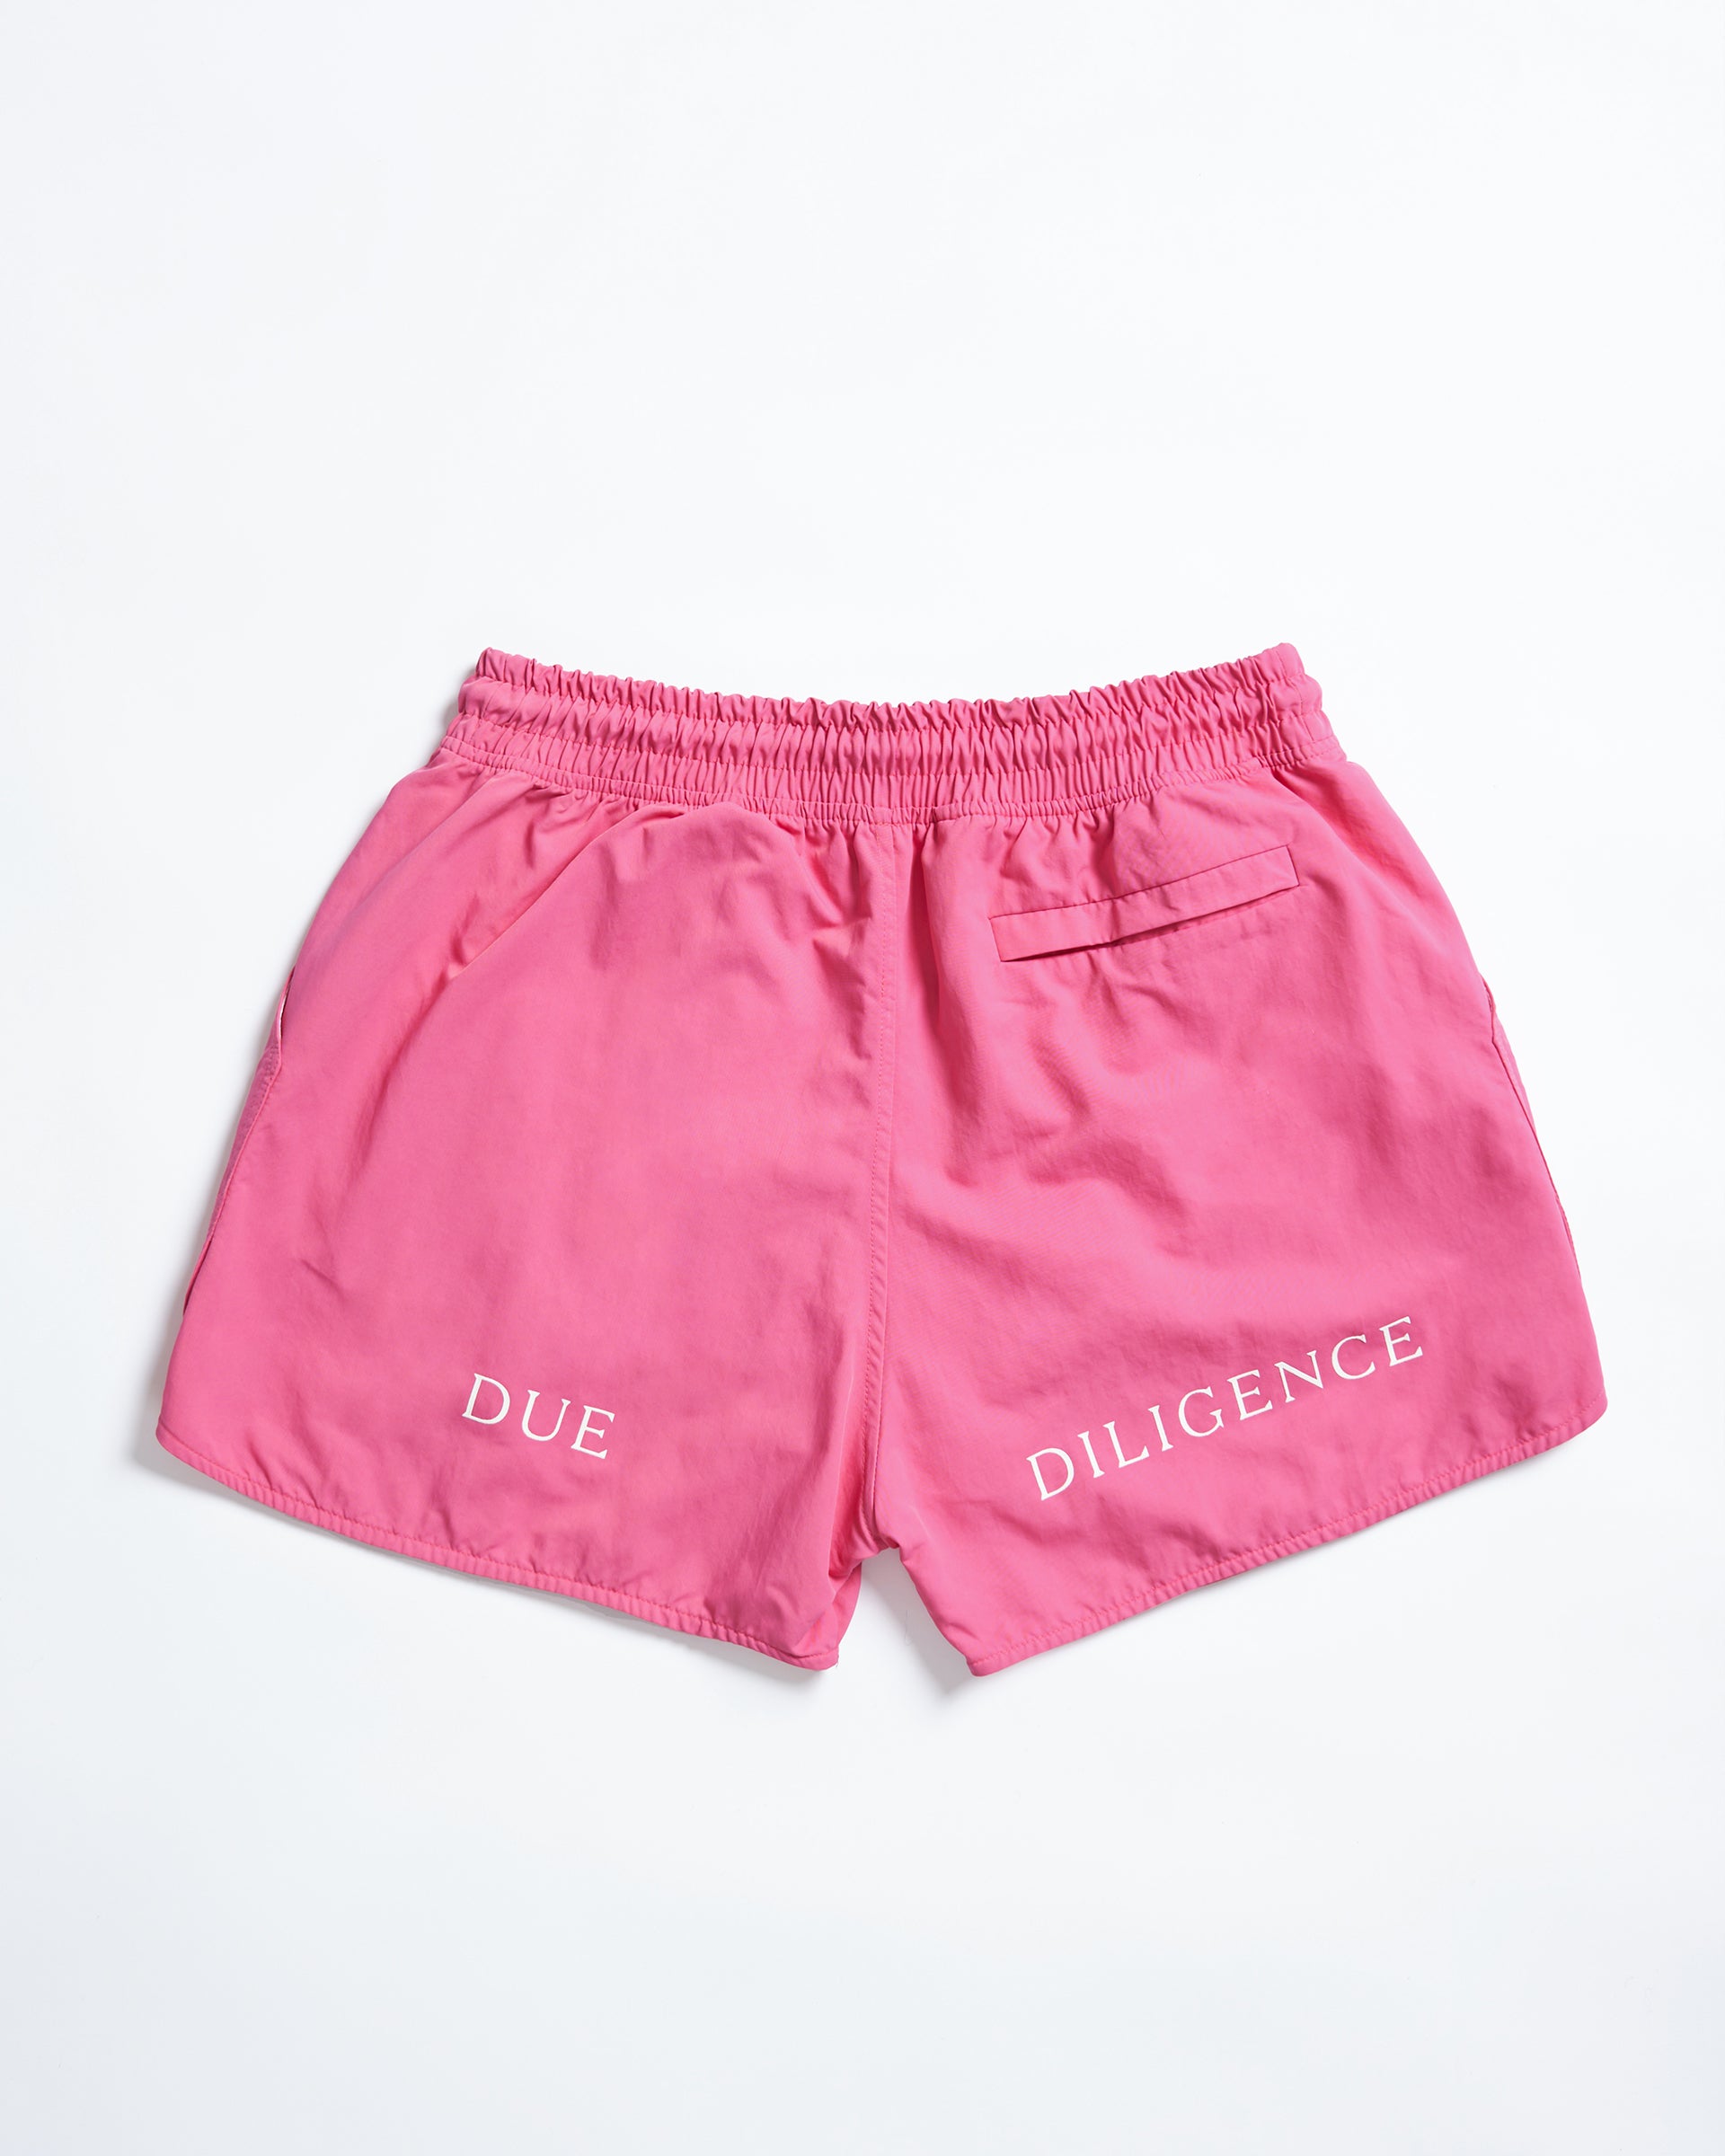 Swim Shorts In Pink Nylon - Due Diligence Apparel